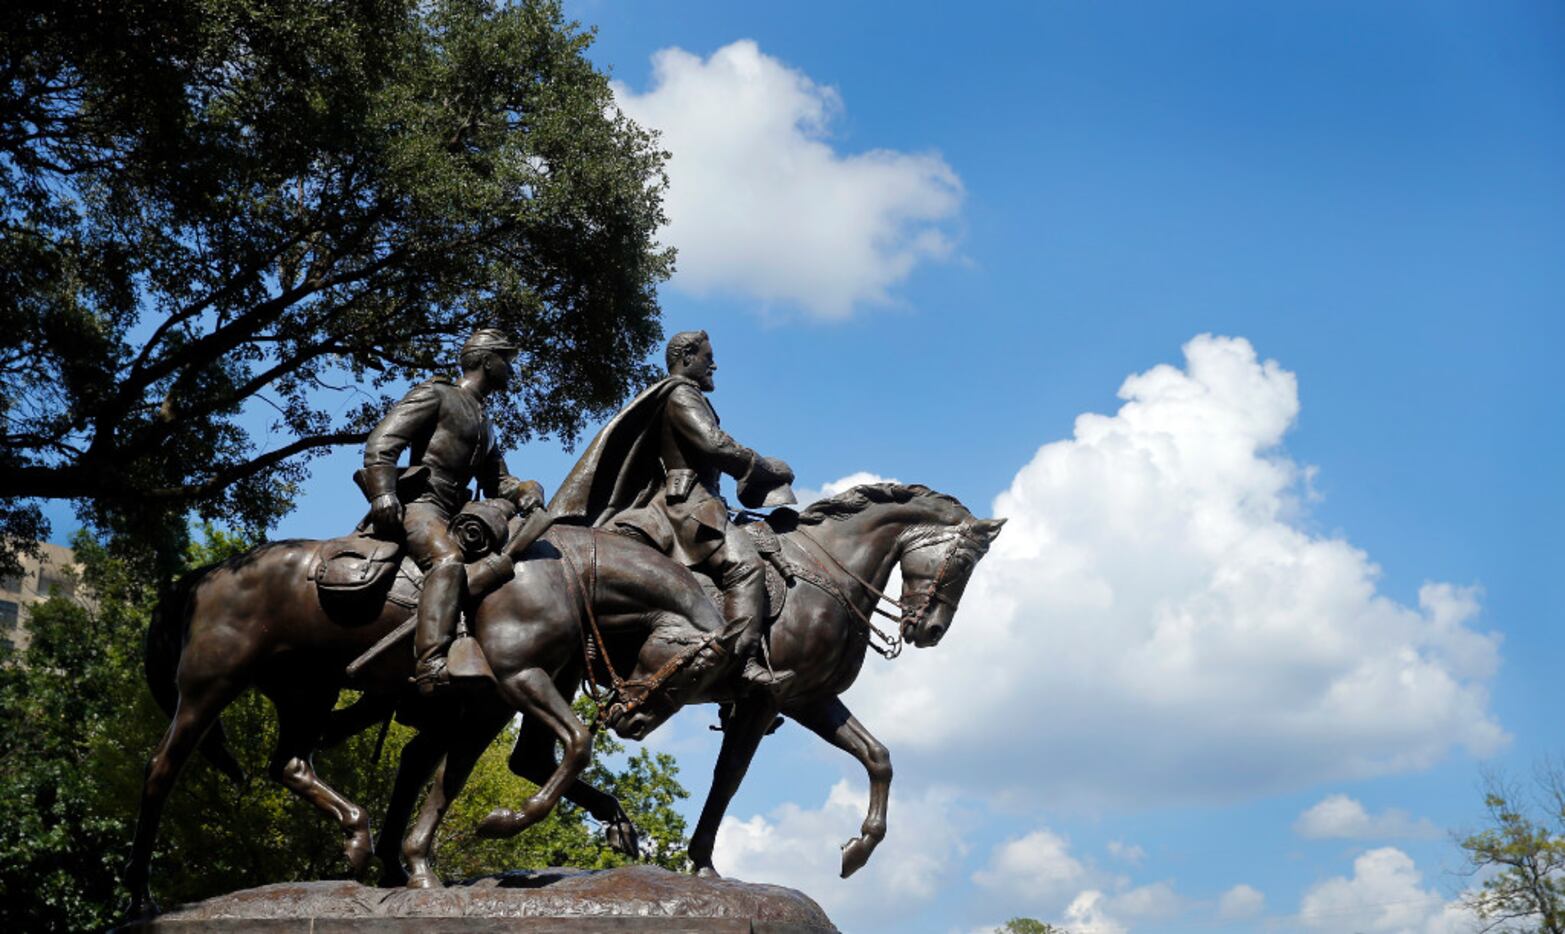 The Robert E. Lee statue is in Robert E Lee Park, in the Turtle Creek area of Dallas.